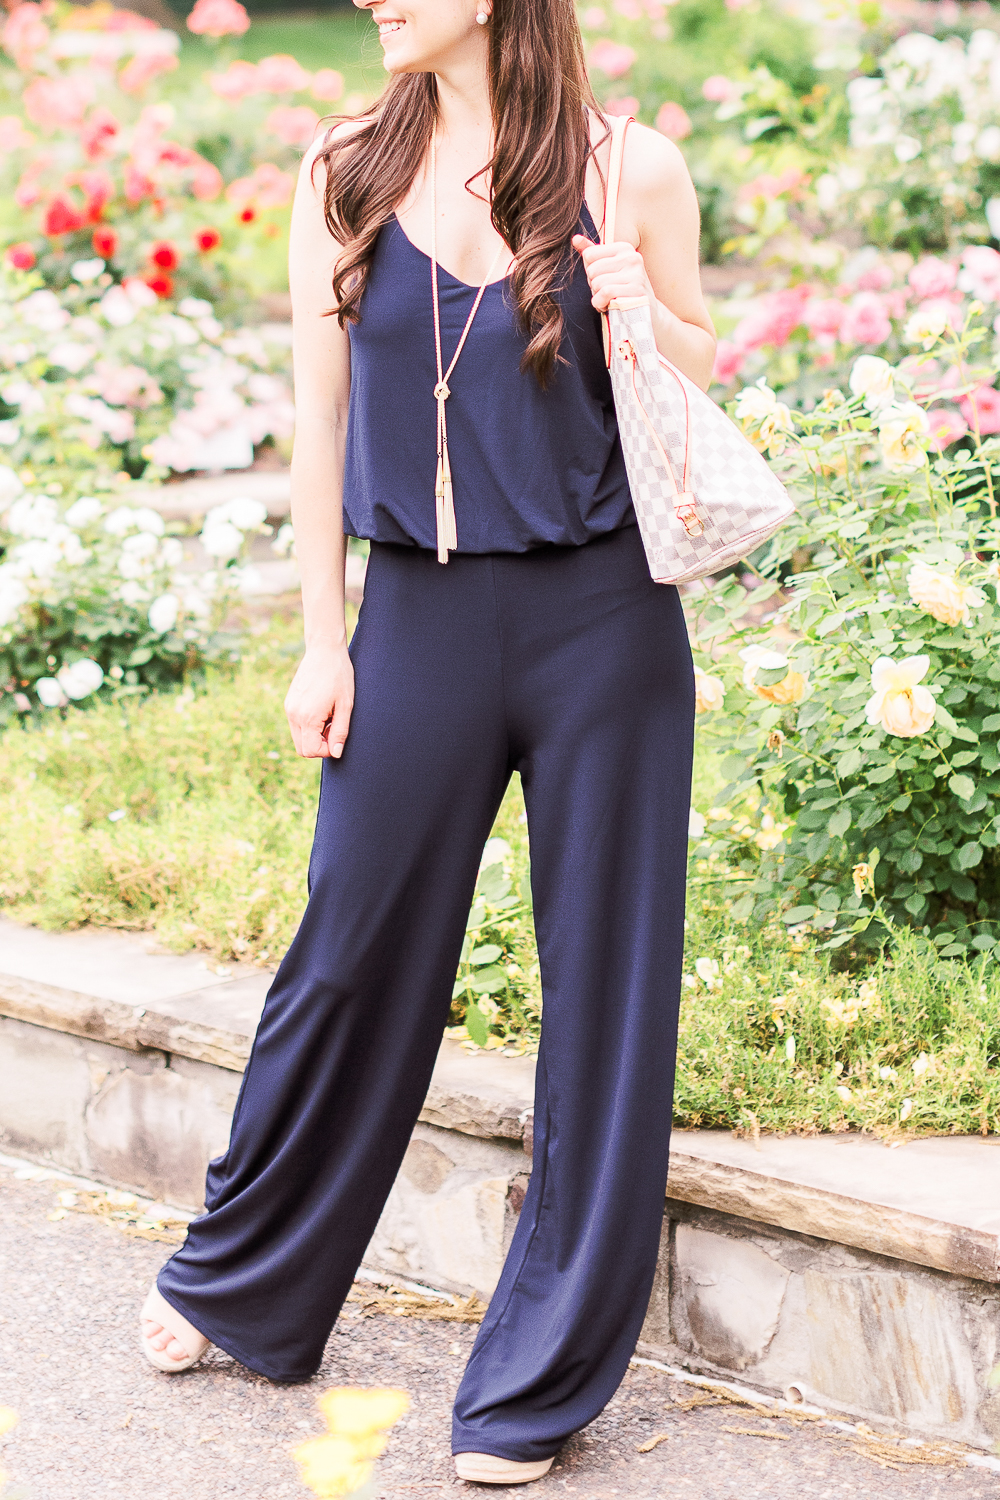 Summer Style Guide: How to Wear a Jumpsuit Casually by popular affordable fashion blogger Stephanie Ziajka from Diary of a Debutante, how to style navy jumpsuit, best shoes to wear with a jumpsuit, navy URBAN K Women's Racerback Jumpsuit, Louis Vuitton Neverfull Dupe Bag, Kendra Scott Phara Necklace